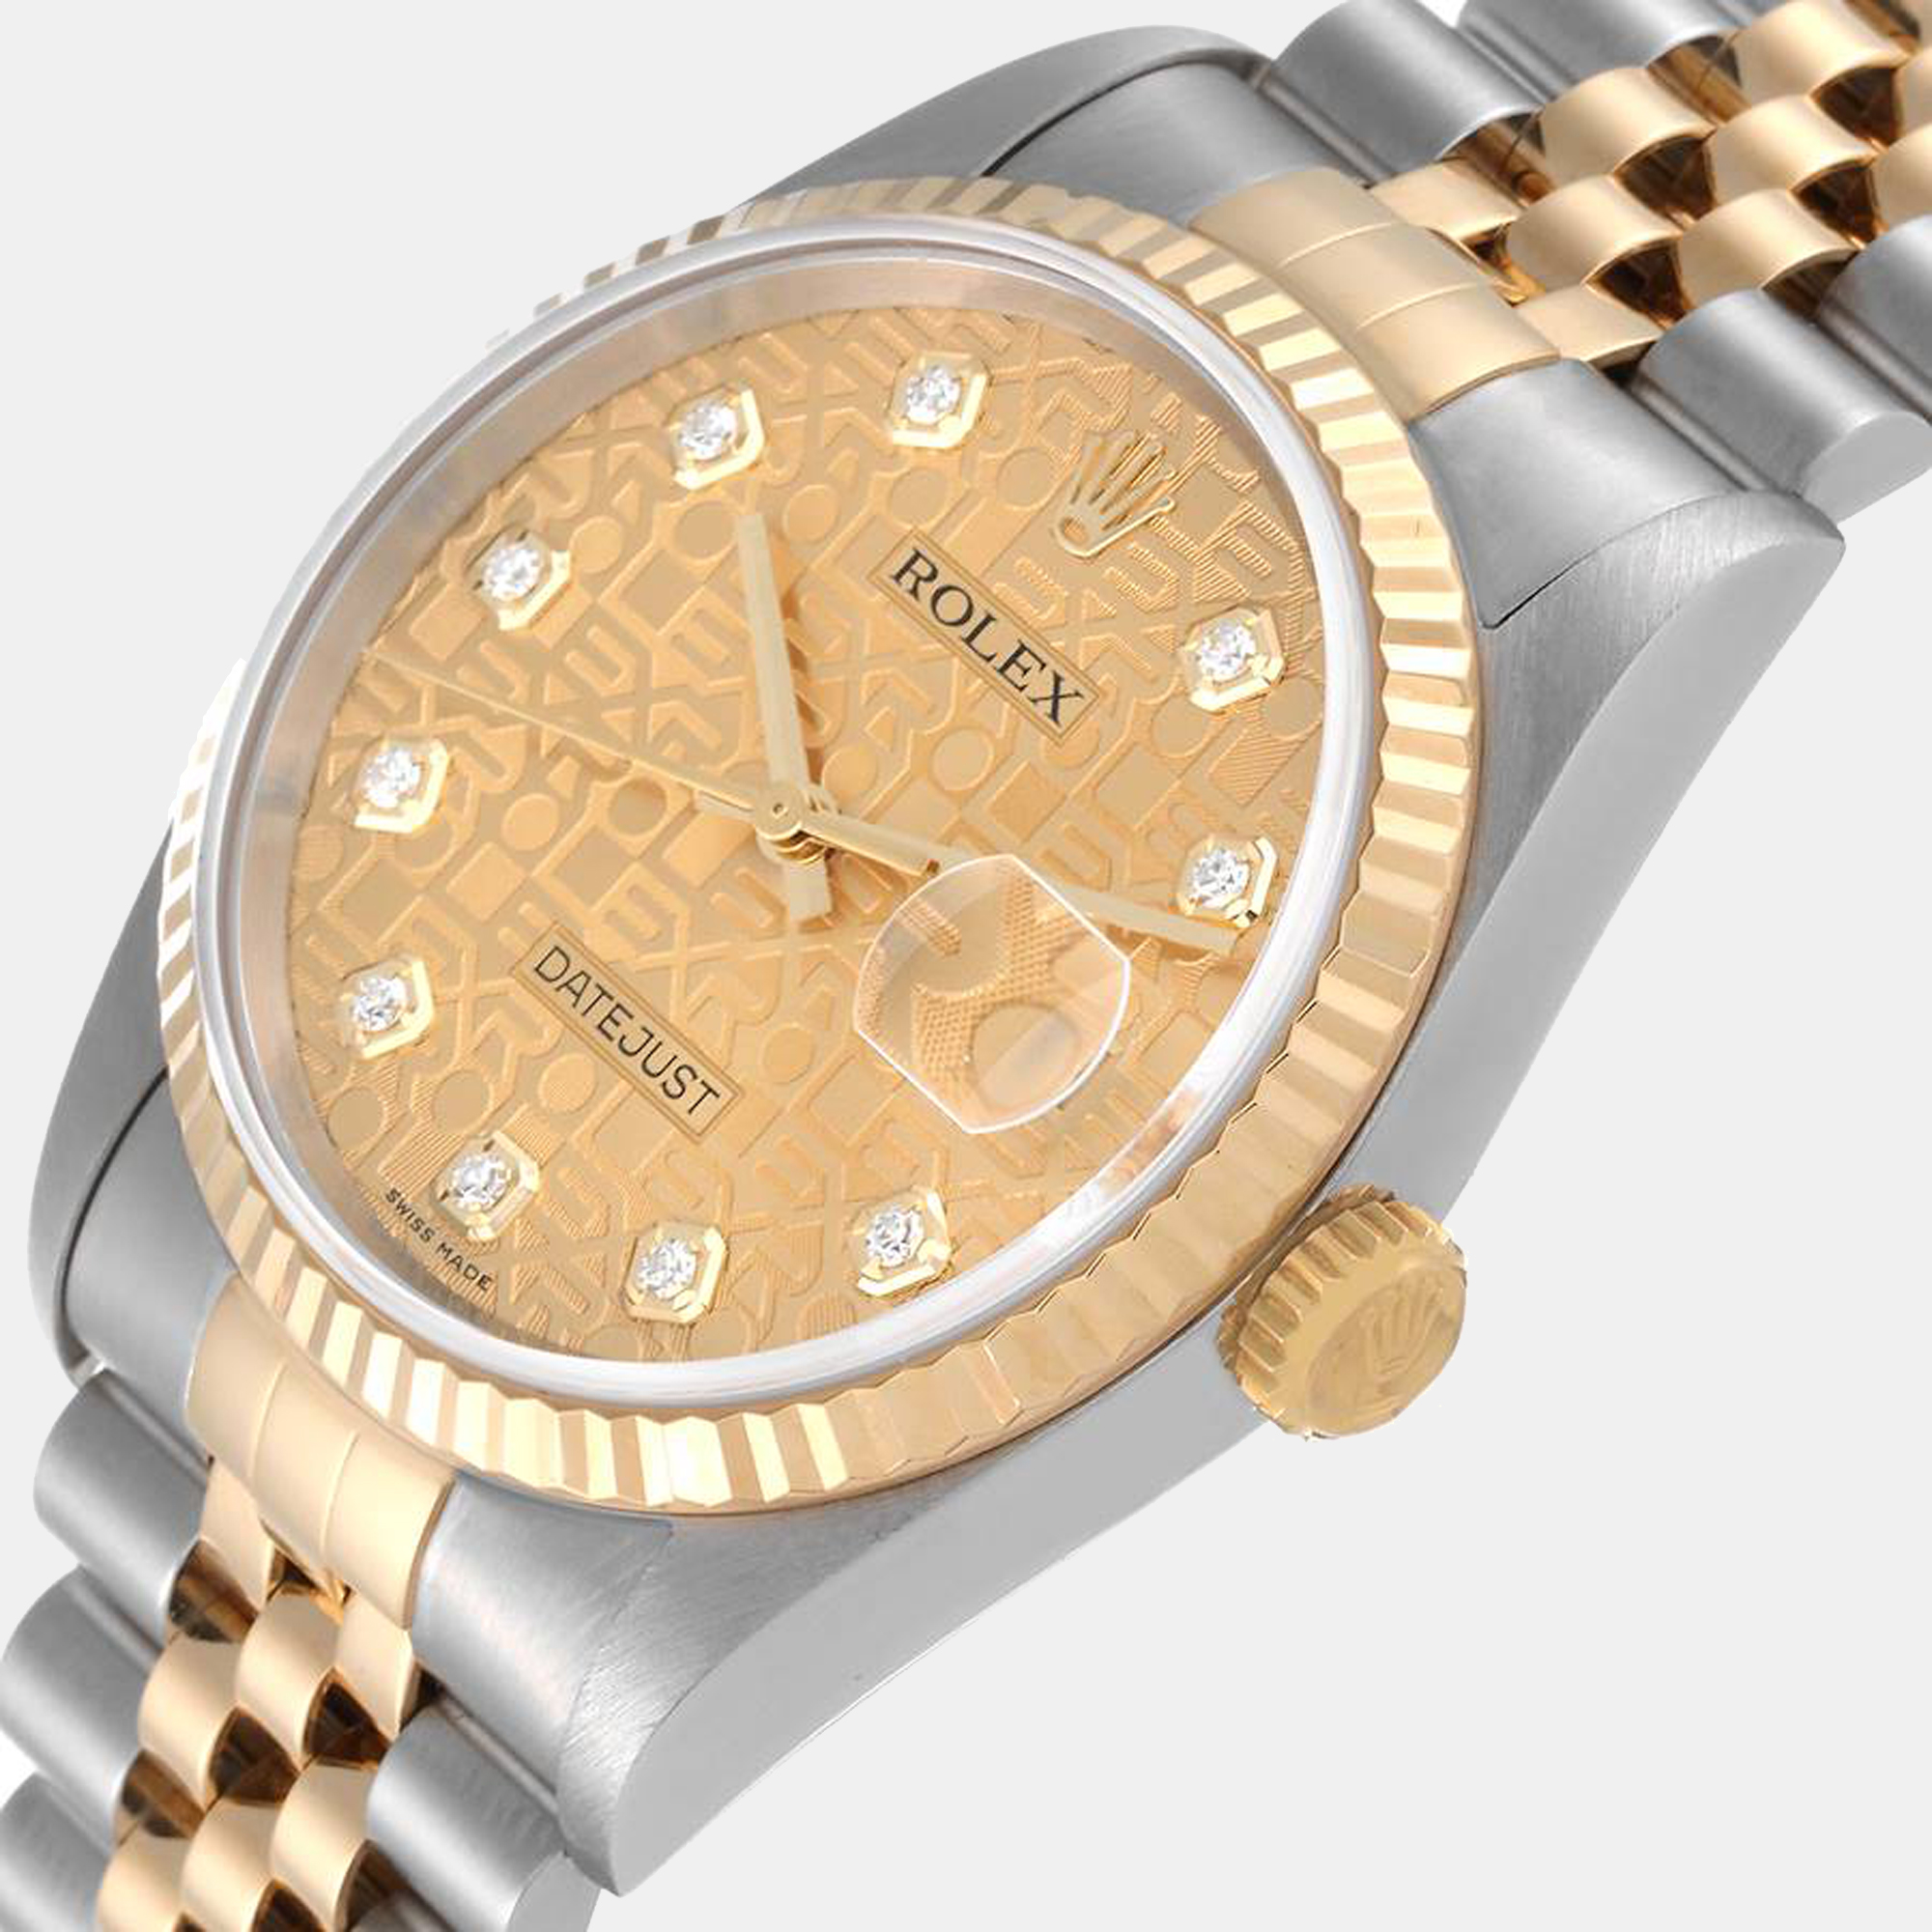 

Rolex Champagne Diamonds 18K Yellow Gold And Stainless Steel Datejust 16233 Men's Wristwatch 36 mm